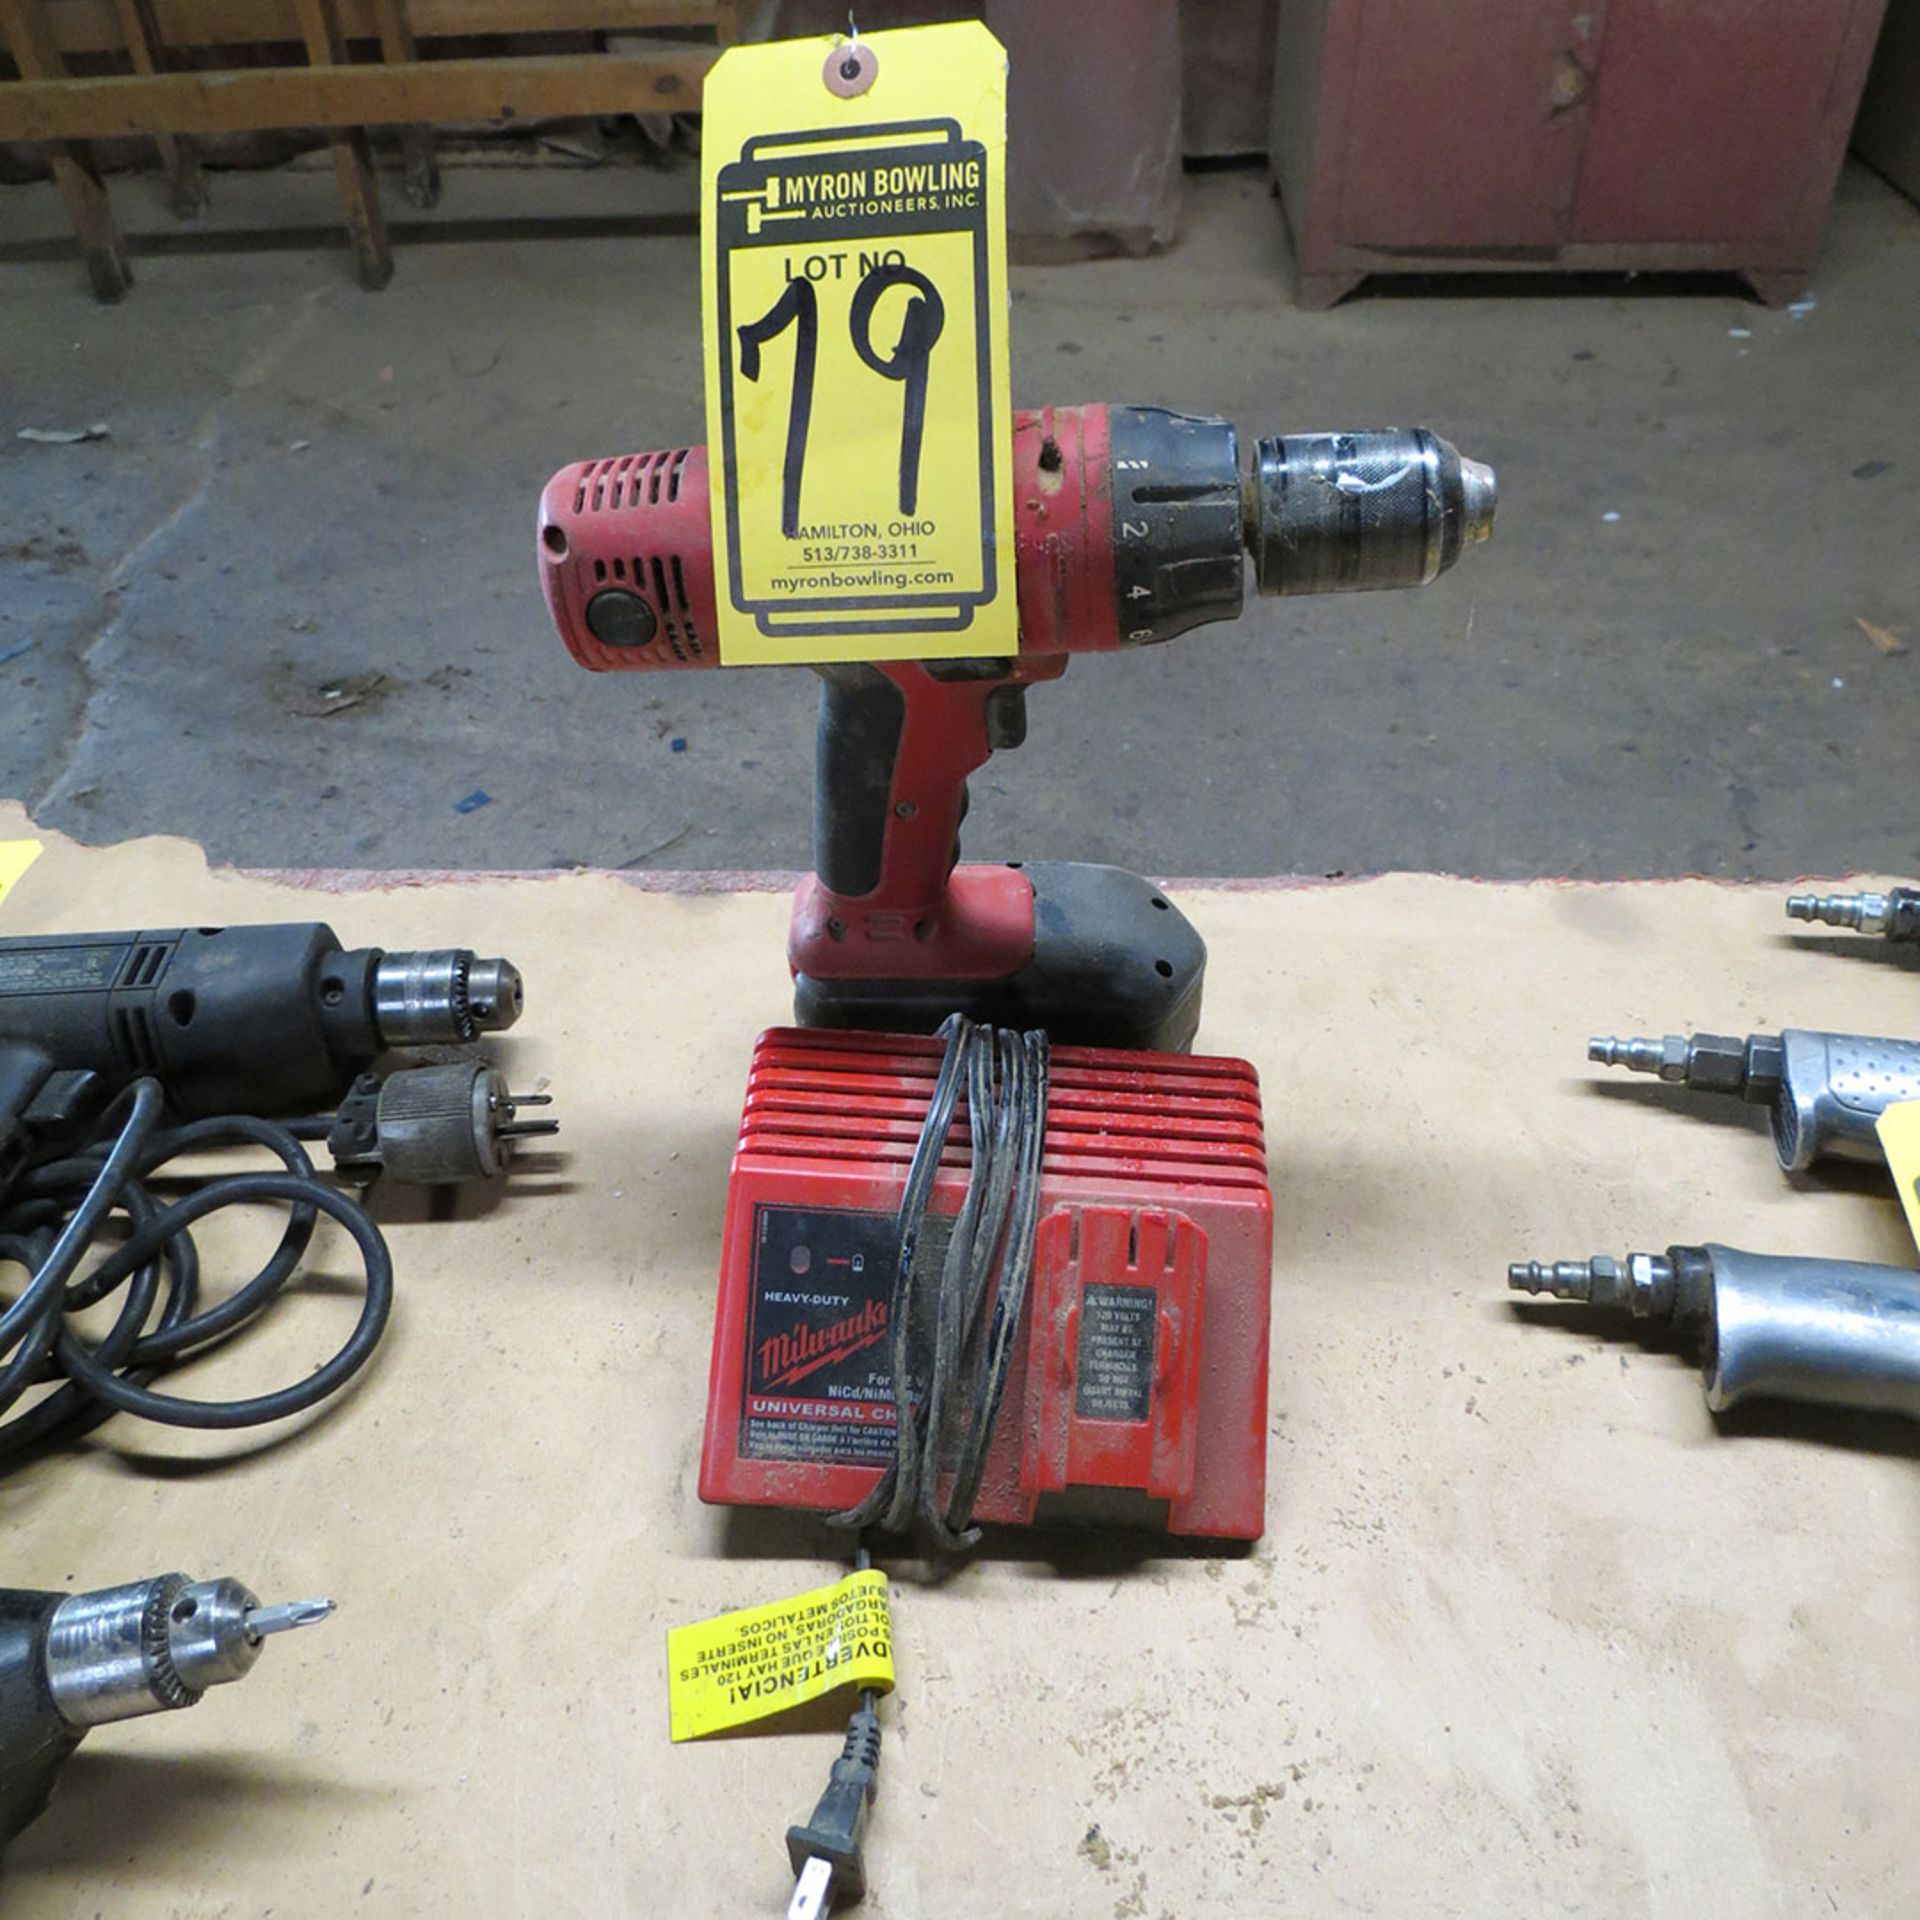 MILWAUKEE CORDLESS DRILL; 18-VOLTS, 1,800 RPM, CHARGER INCLUDED